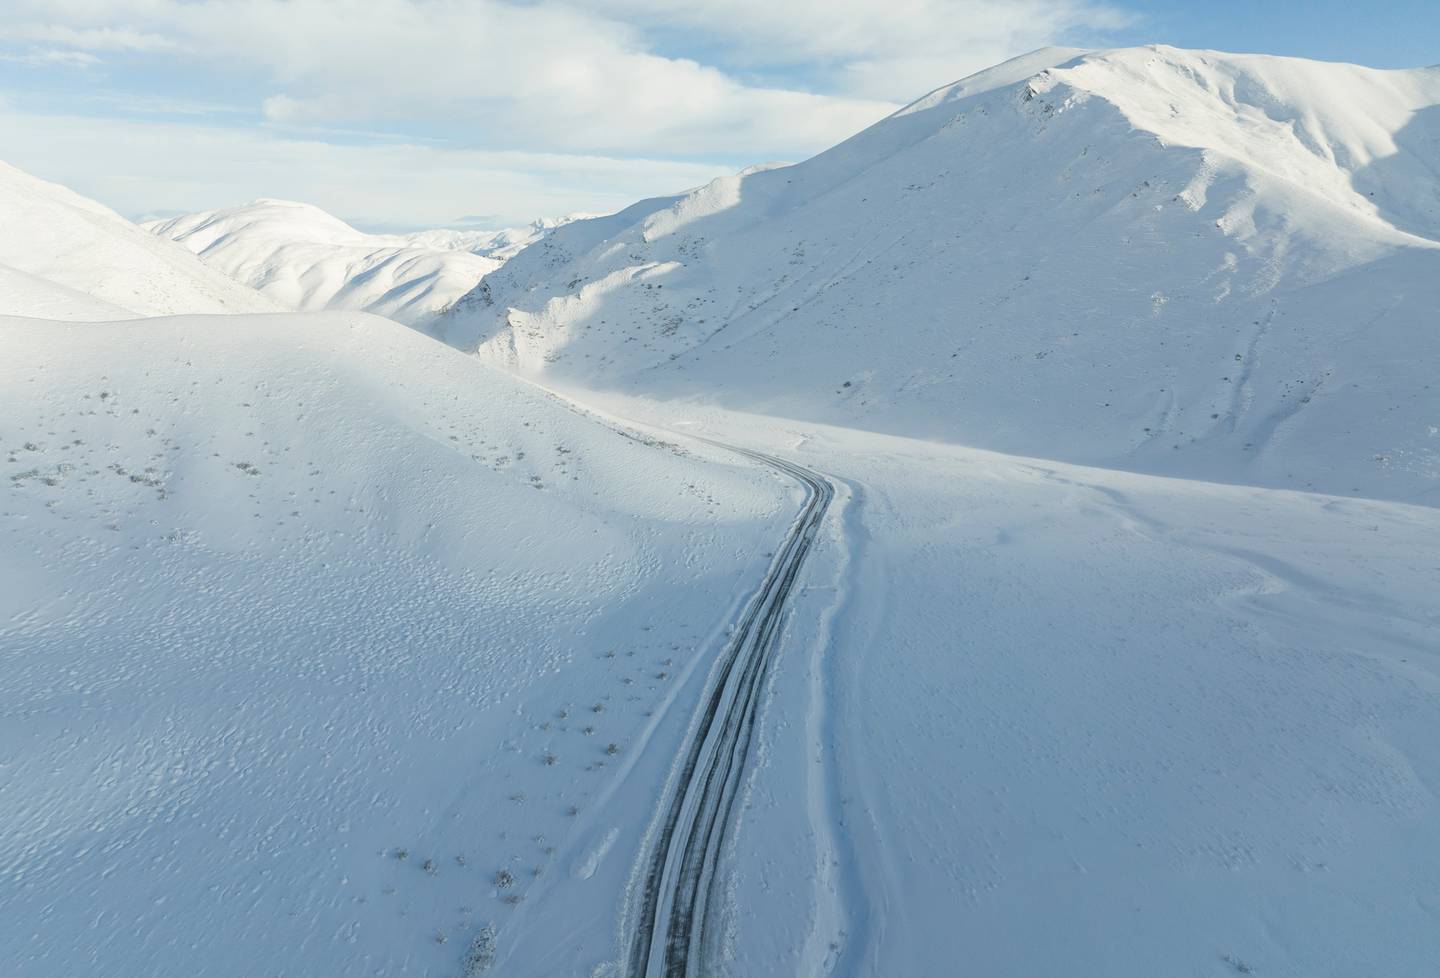 A mammoth effort is under way to clear the Lindis Pass after more than 1.5m of snow fell in the...